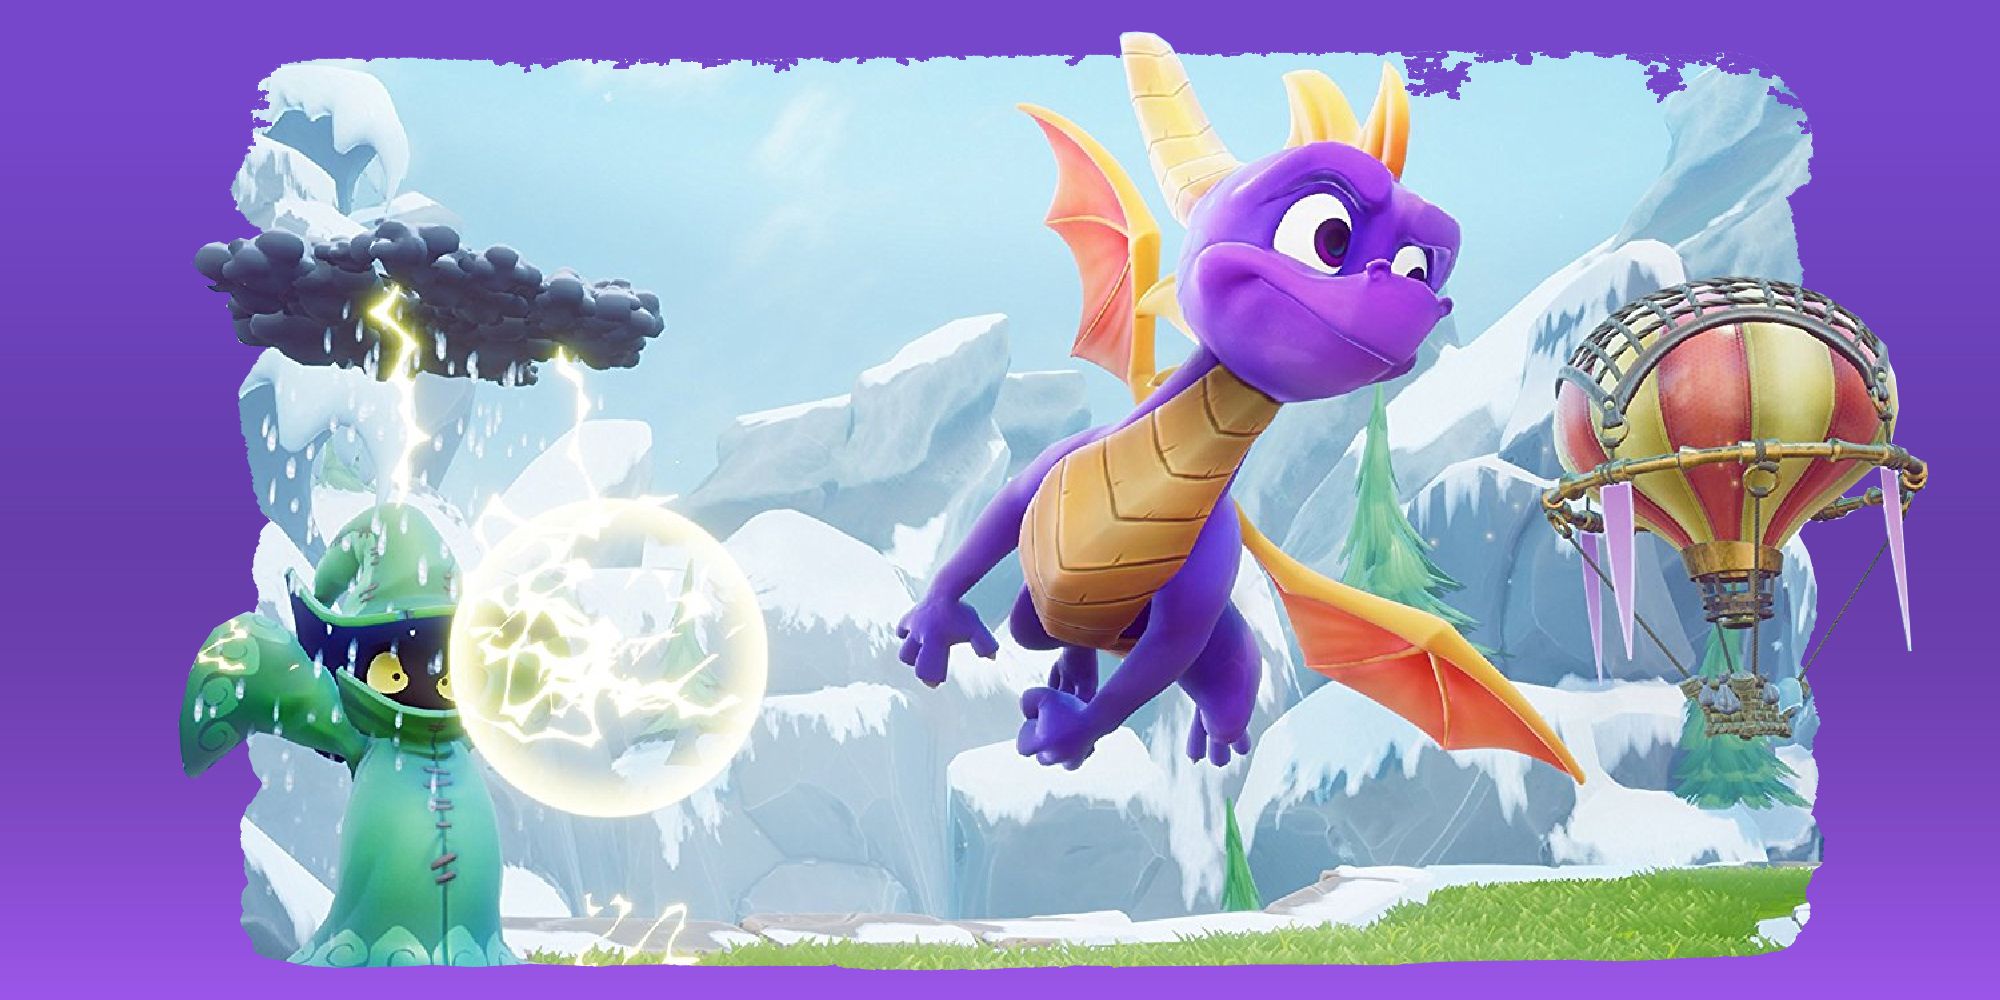 Spyro flying through the Magic Crafters world